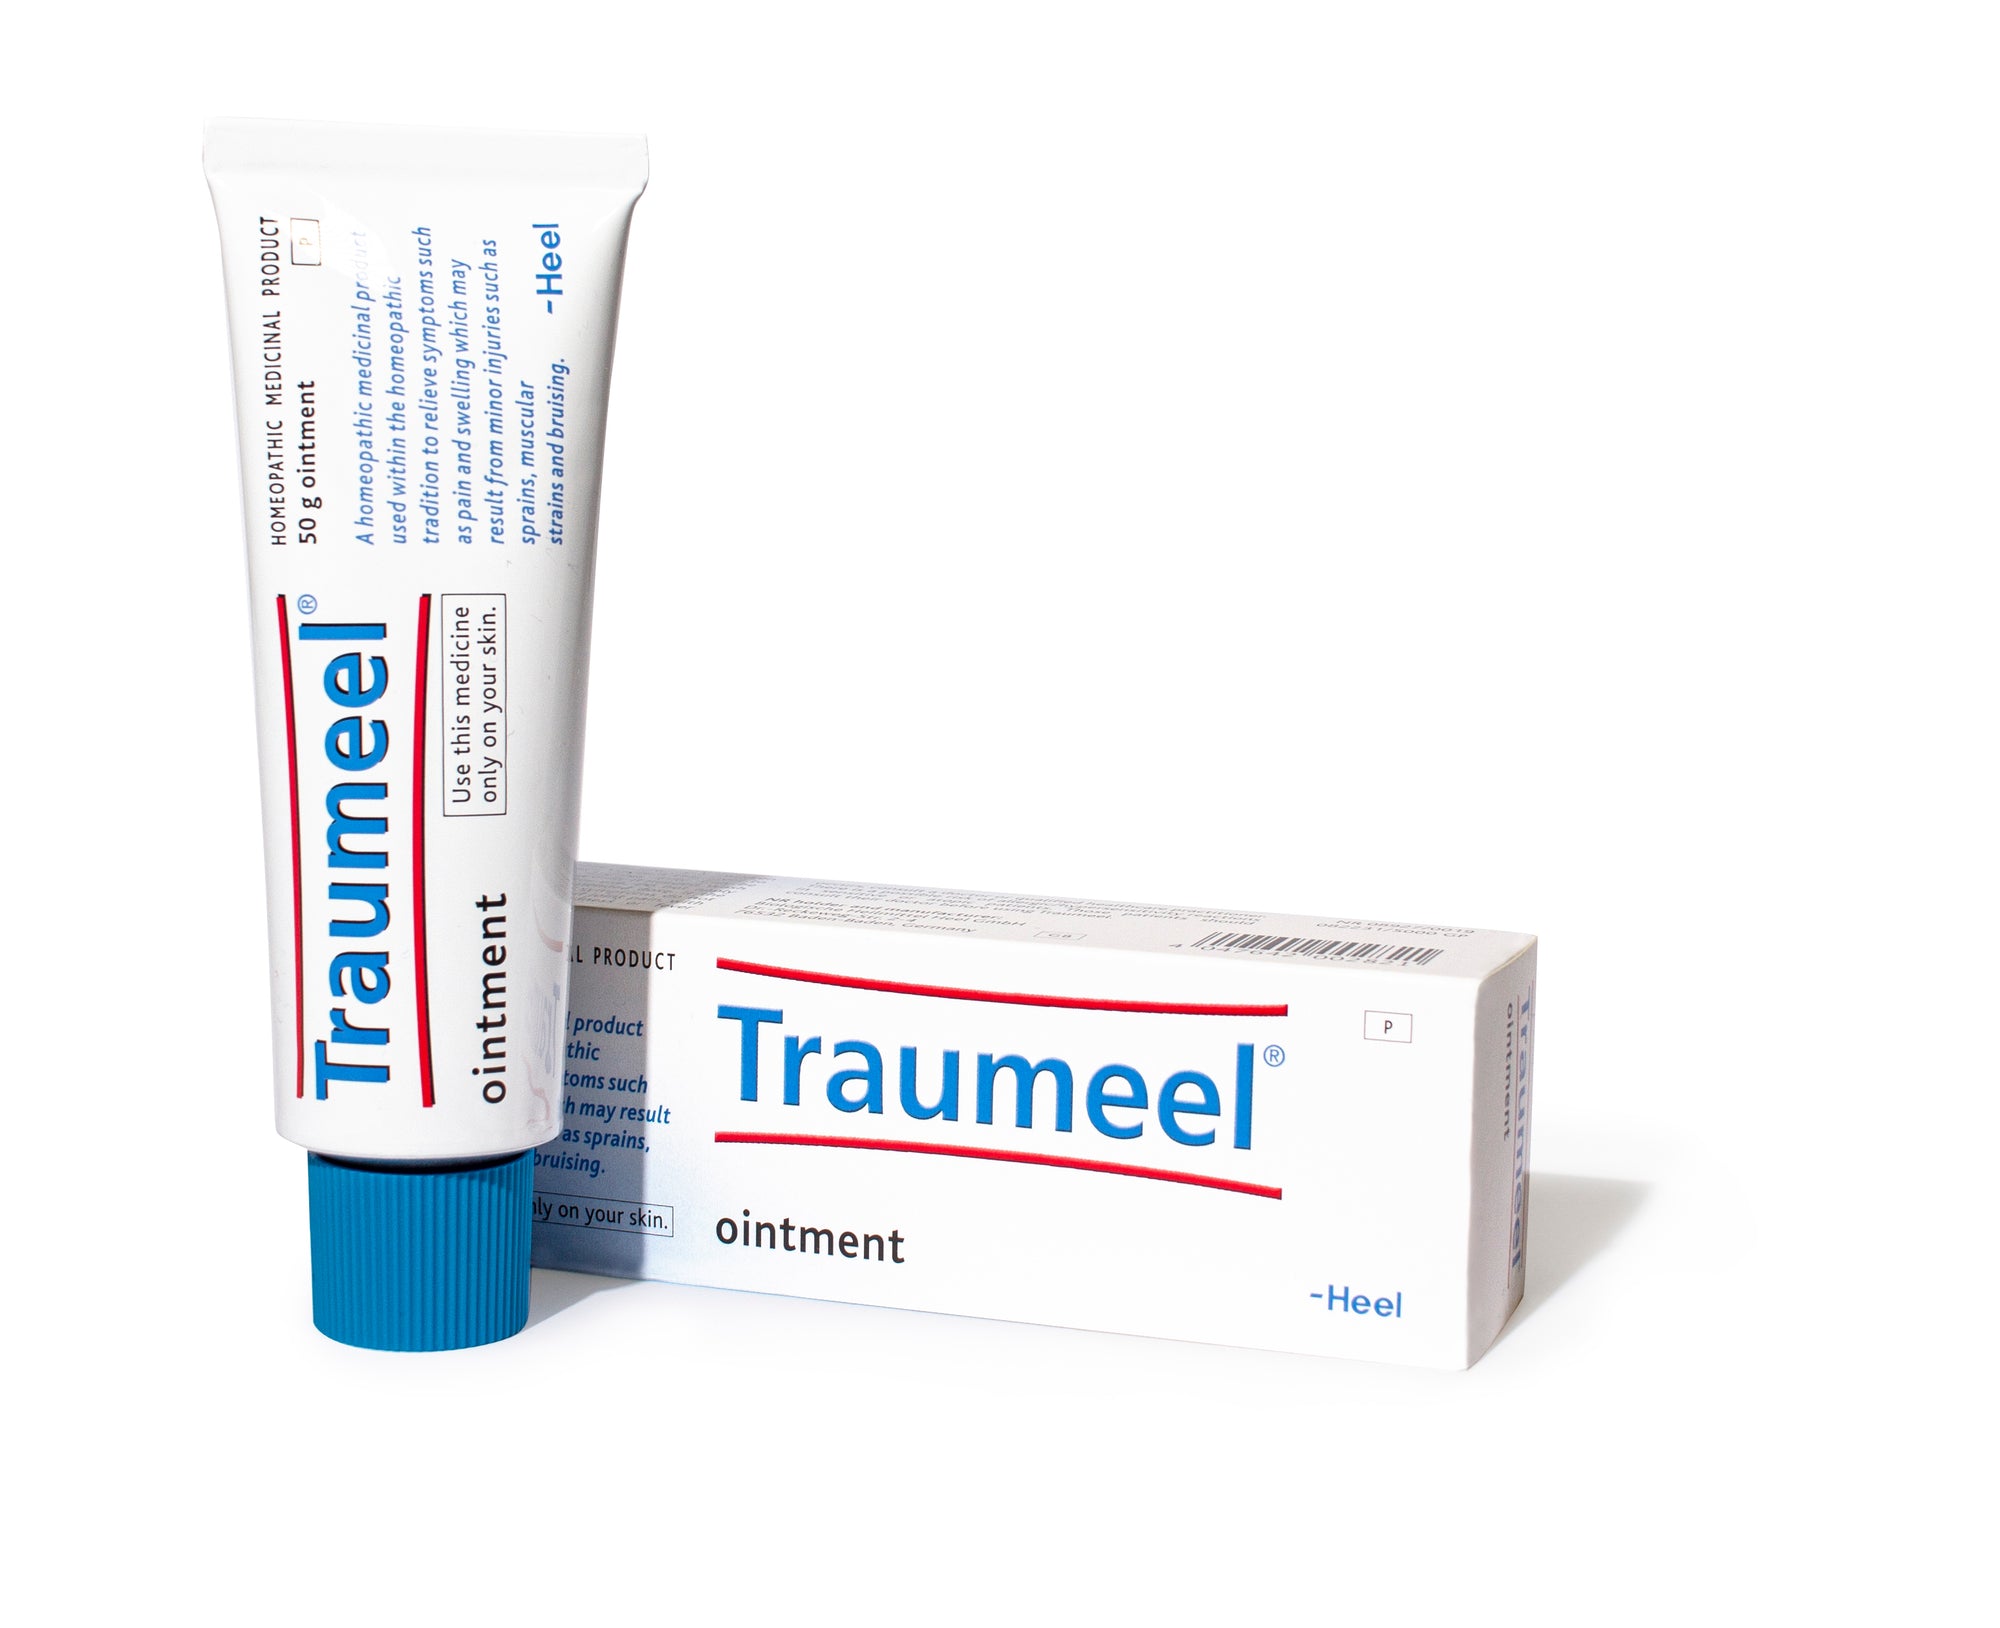 Traumeel Ointment 50g | Nelson Pharmacies Limited